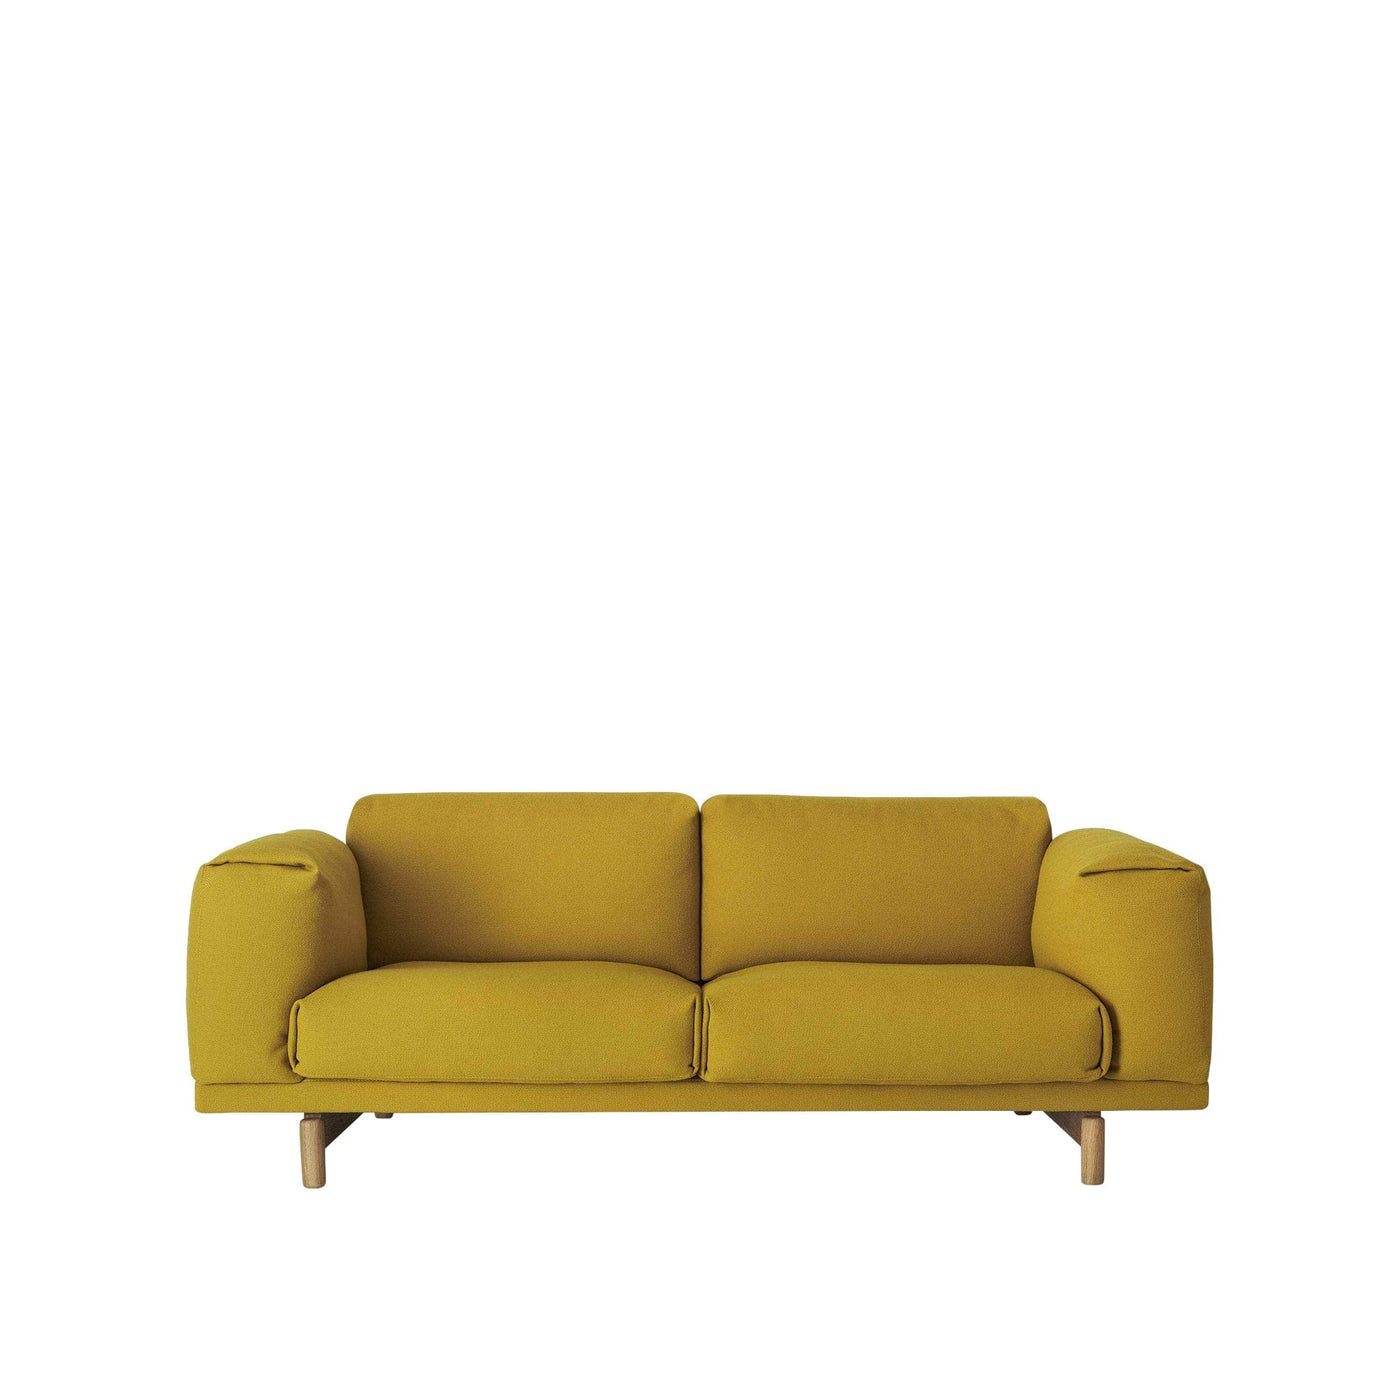 Hallingdal 457 by Kvadrat. Yellow upholstery fabric made to order for Muuto Outline & Rest sofas. Order free fabric swatches at someday designs.